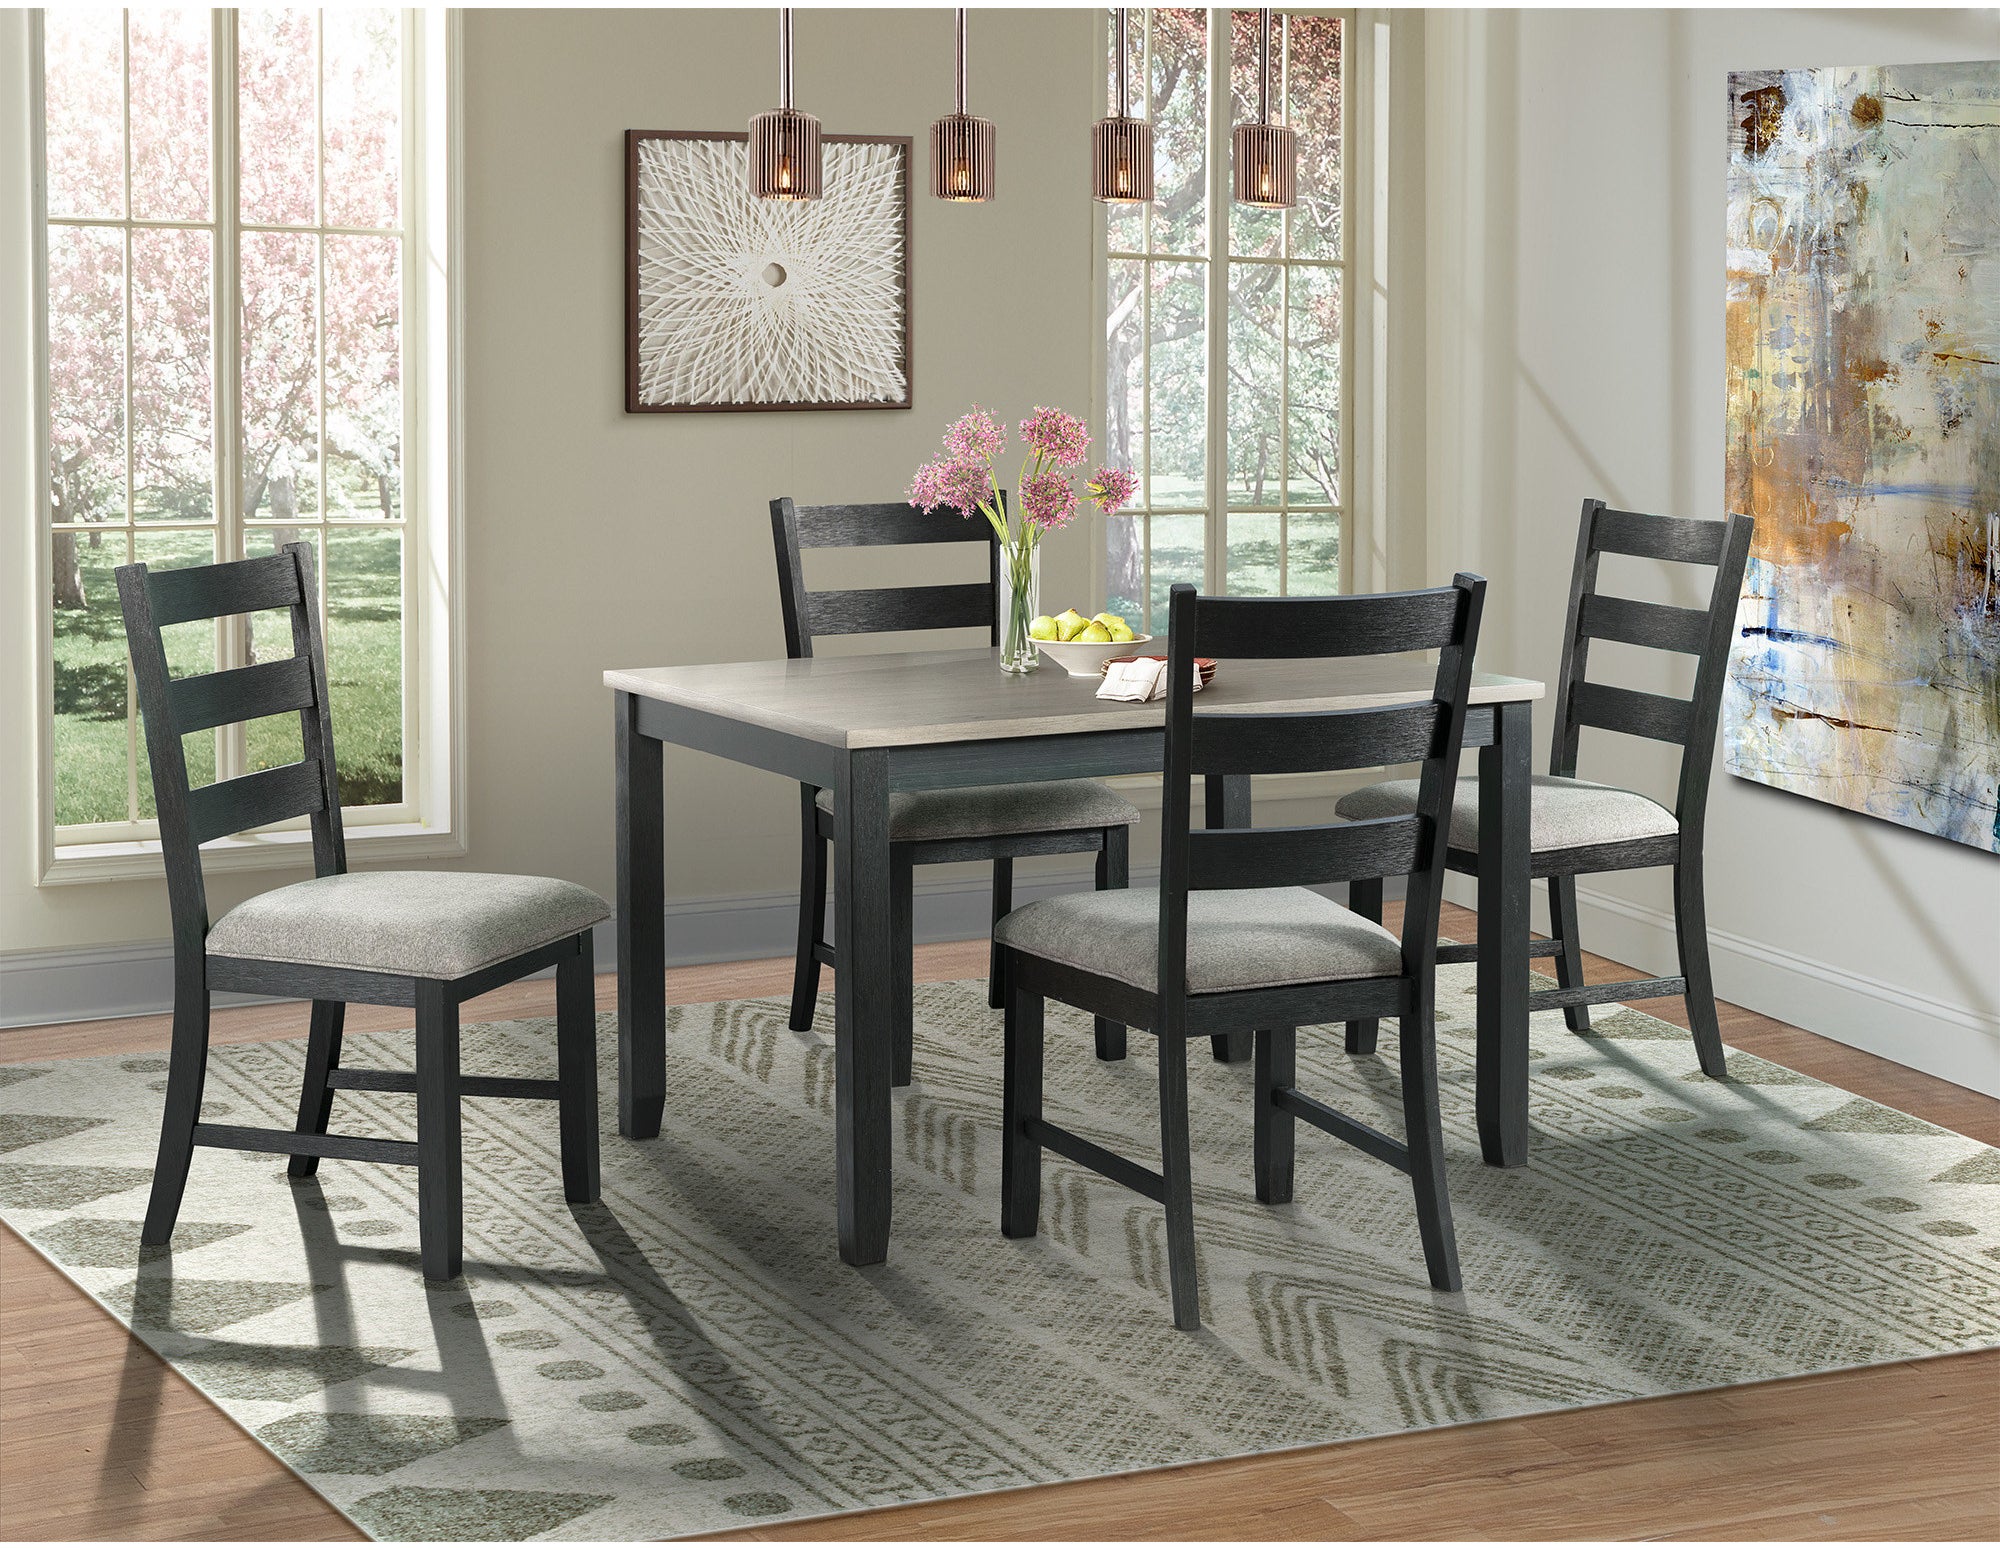 The grey and black dining set